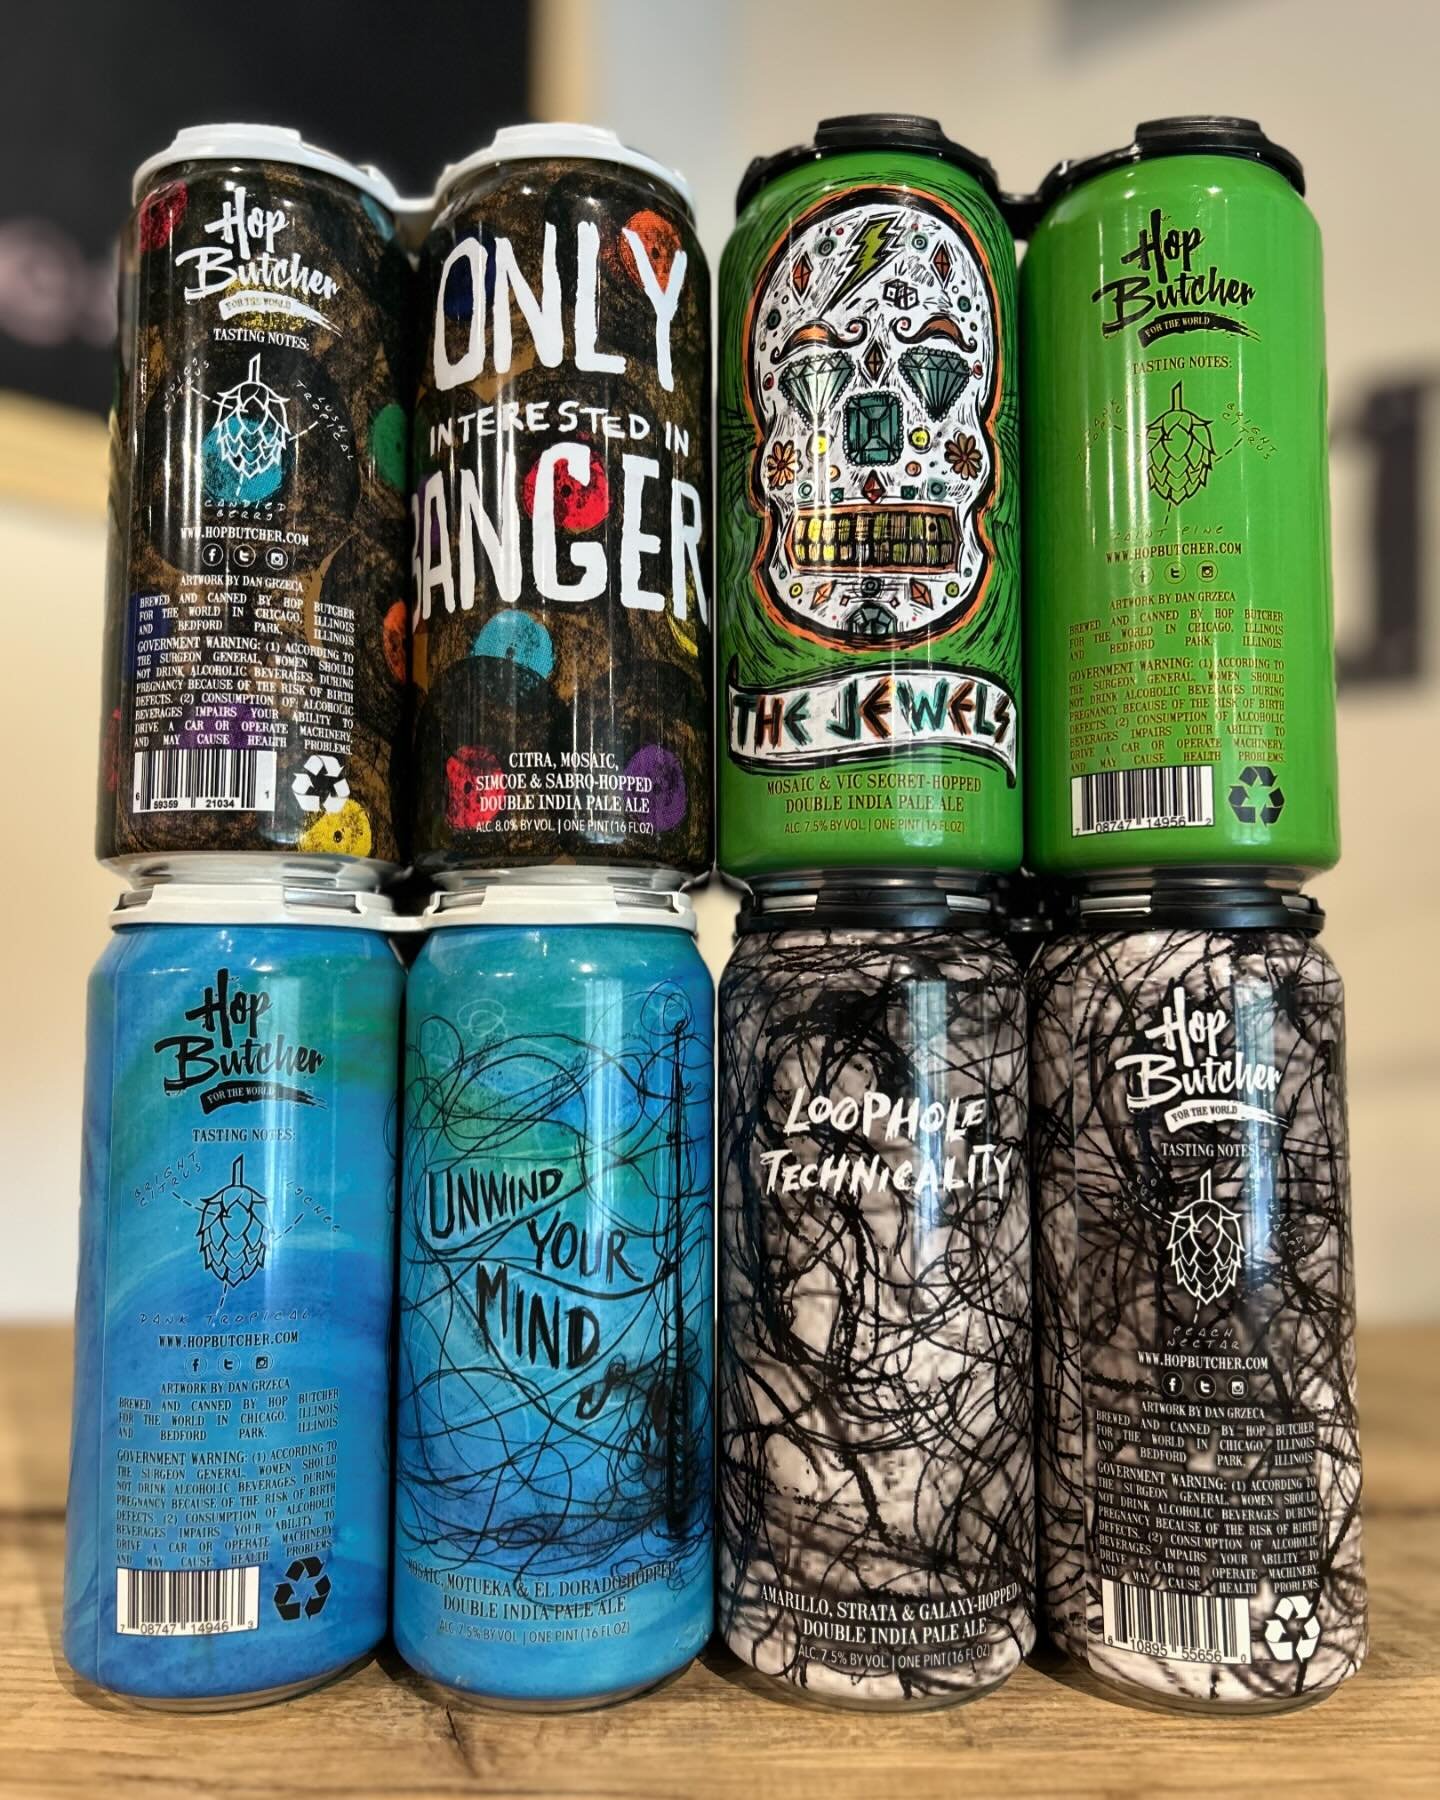 @hopbutcher is back in the shop this week #NowAvailable #SudburyCraftBeer #SudburyMA
&mdash;
Only Interested In Bangers - 8.0% Double India Pale Ale hopped with Citra, Mosaic, Simcoe &amp; Sabro.
&mdash;
The Jewels - 7.5% Double India Pale Ale hopped